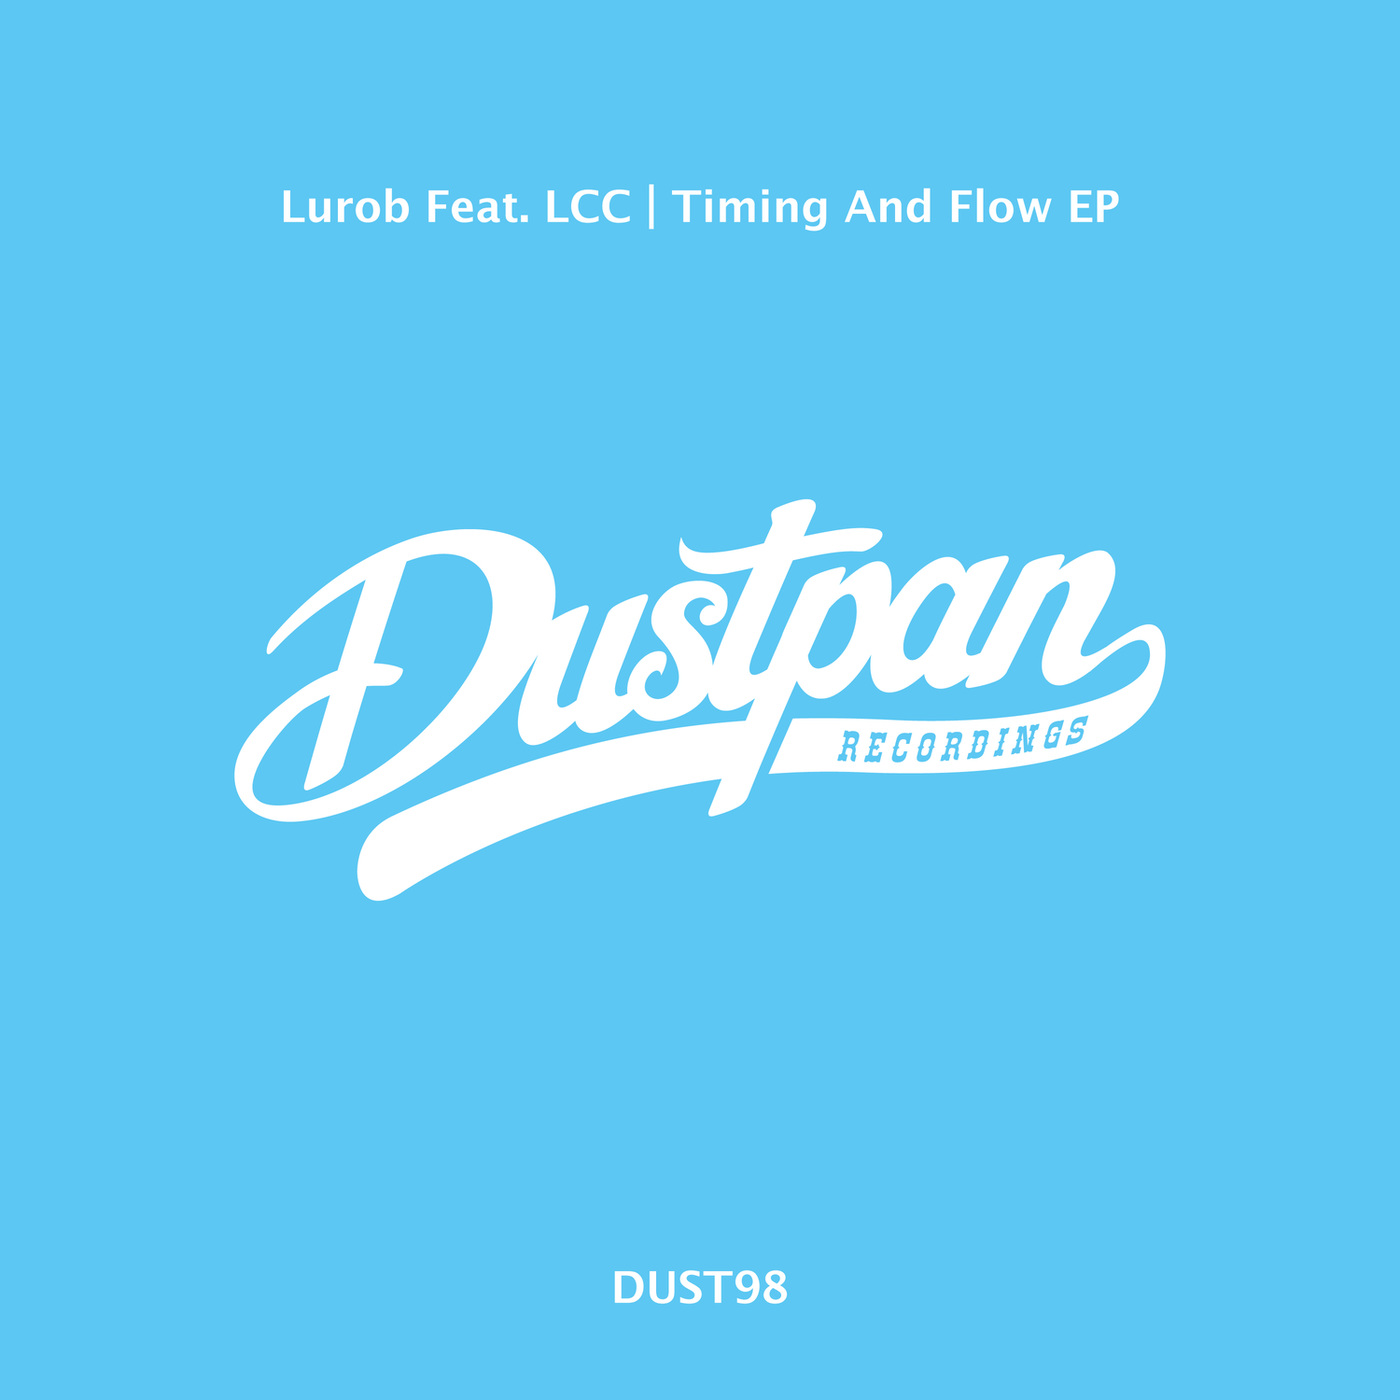 Lurob ft LCC - Timing and Flow EP / Dustpan Recordings